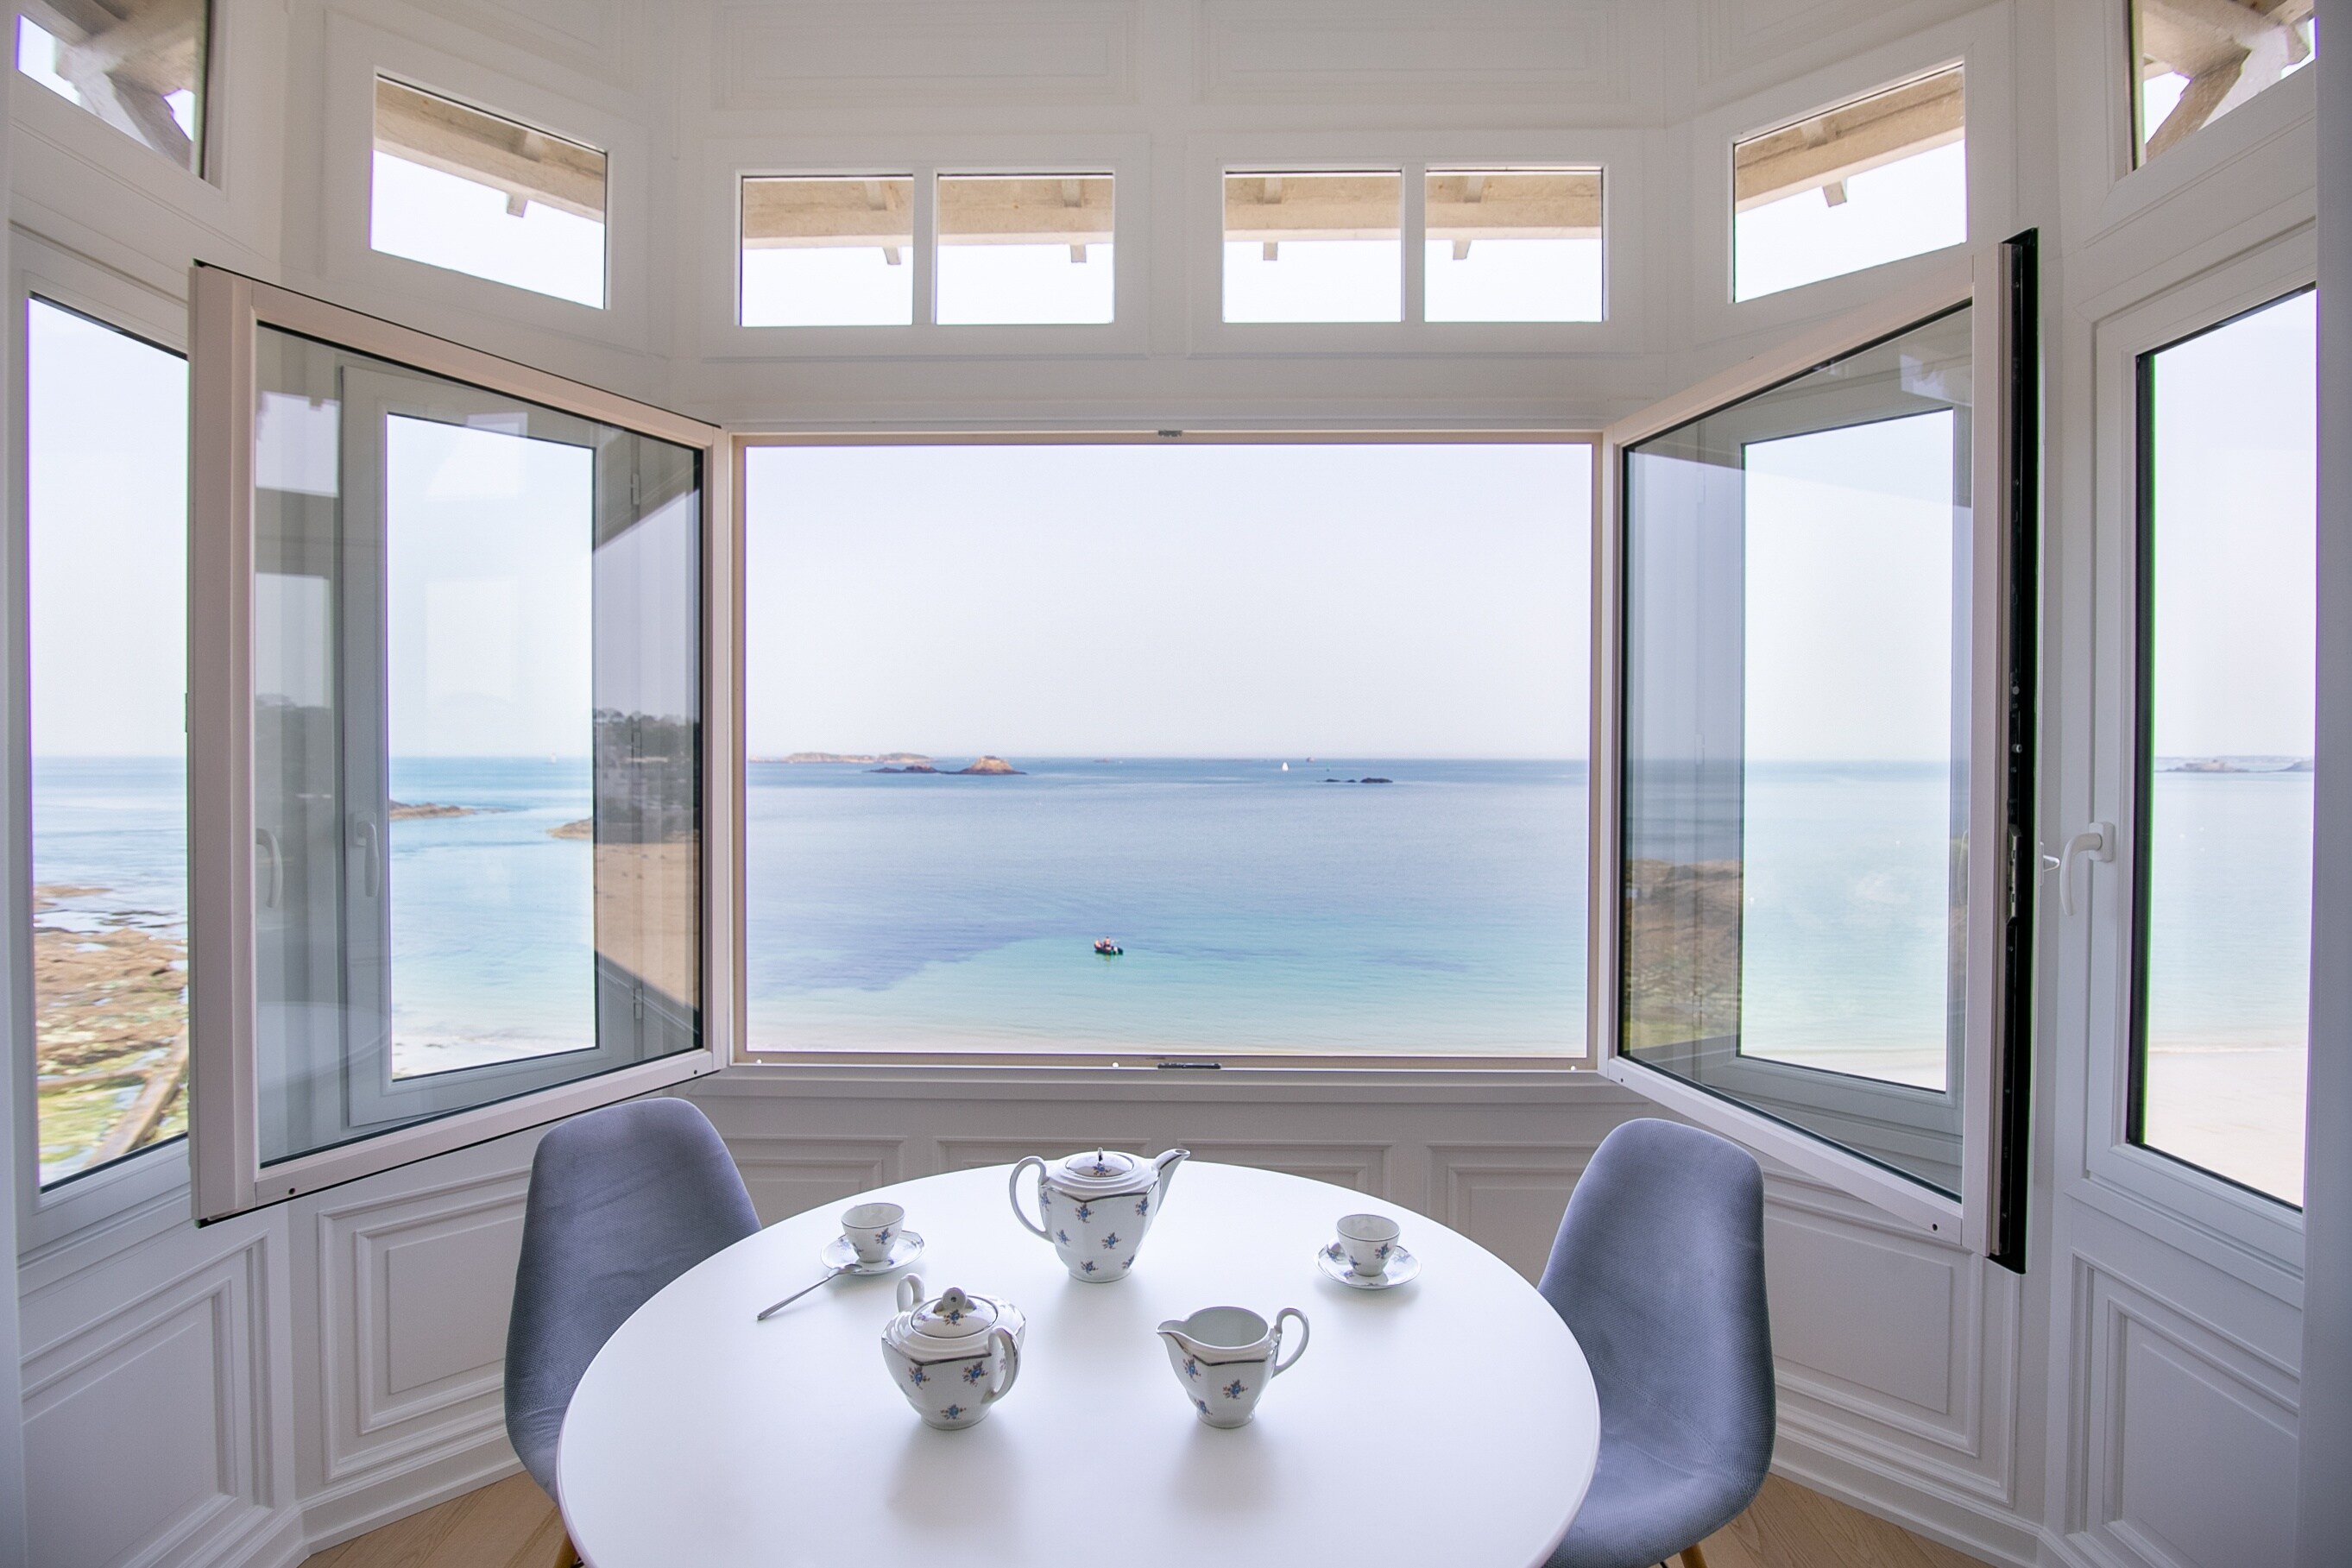 Property Image 1 - Charming one bedroom flat with 180 degree sea views